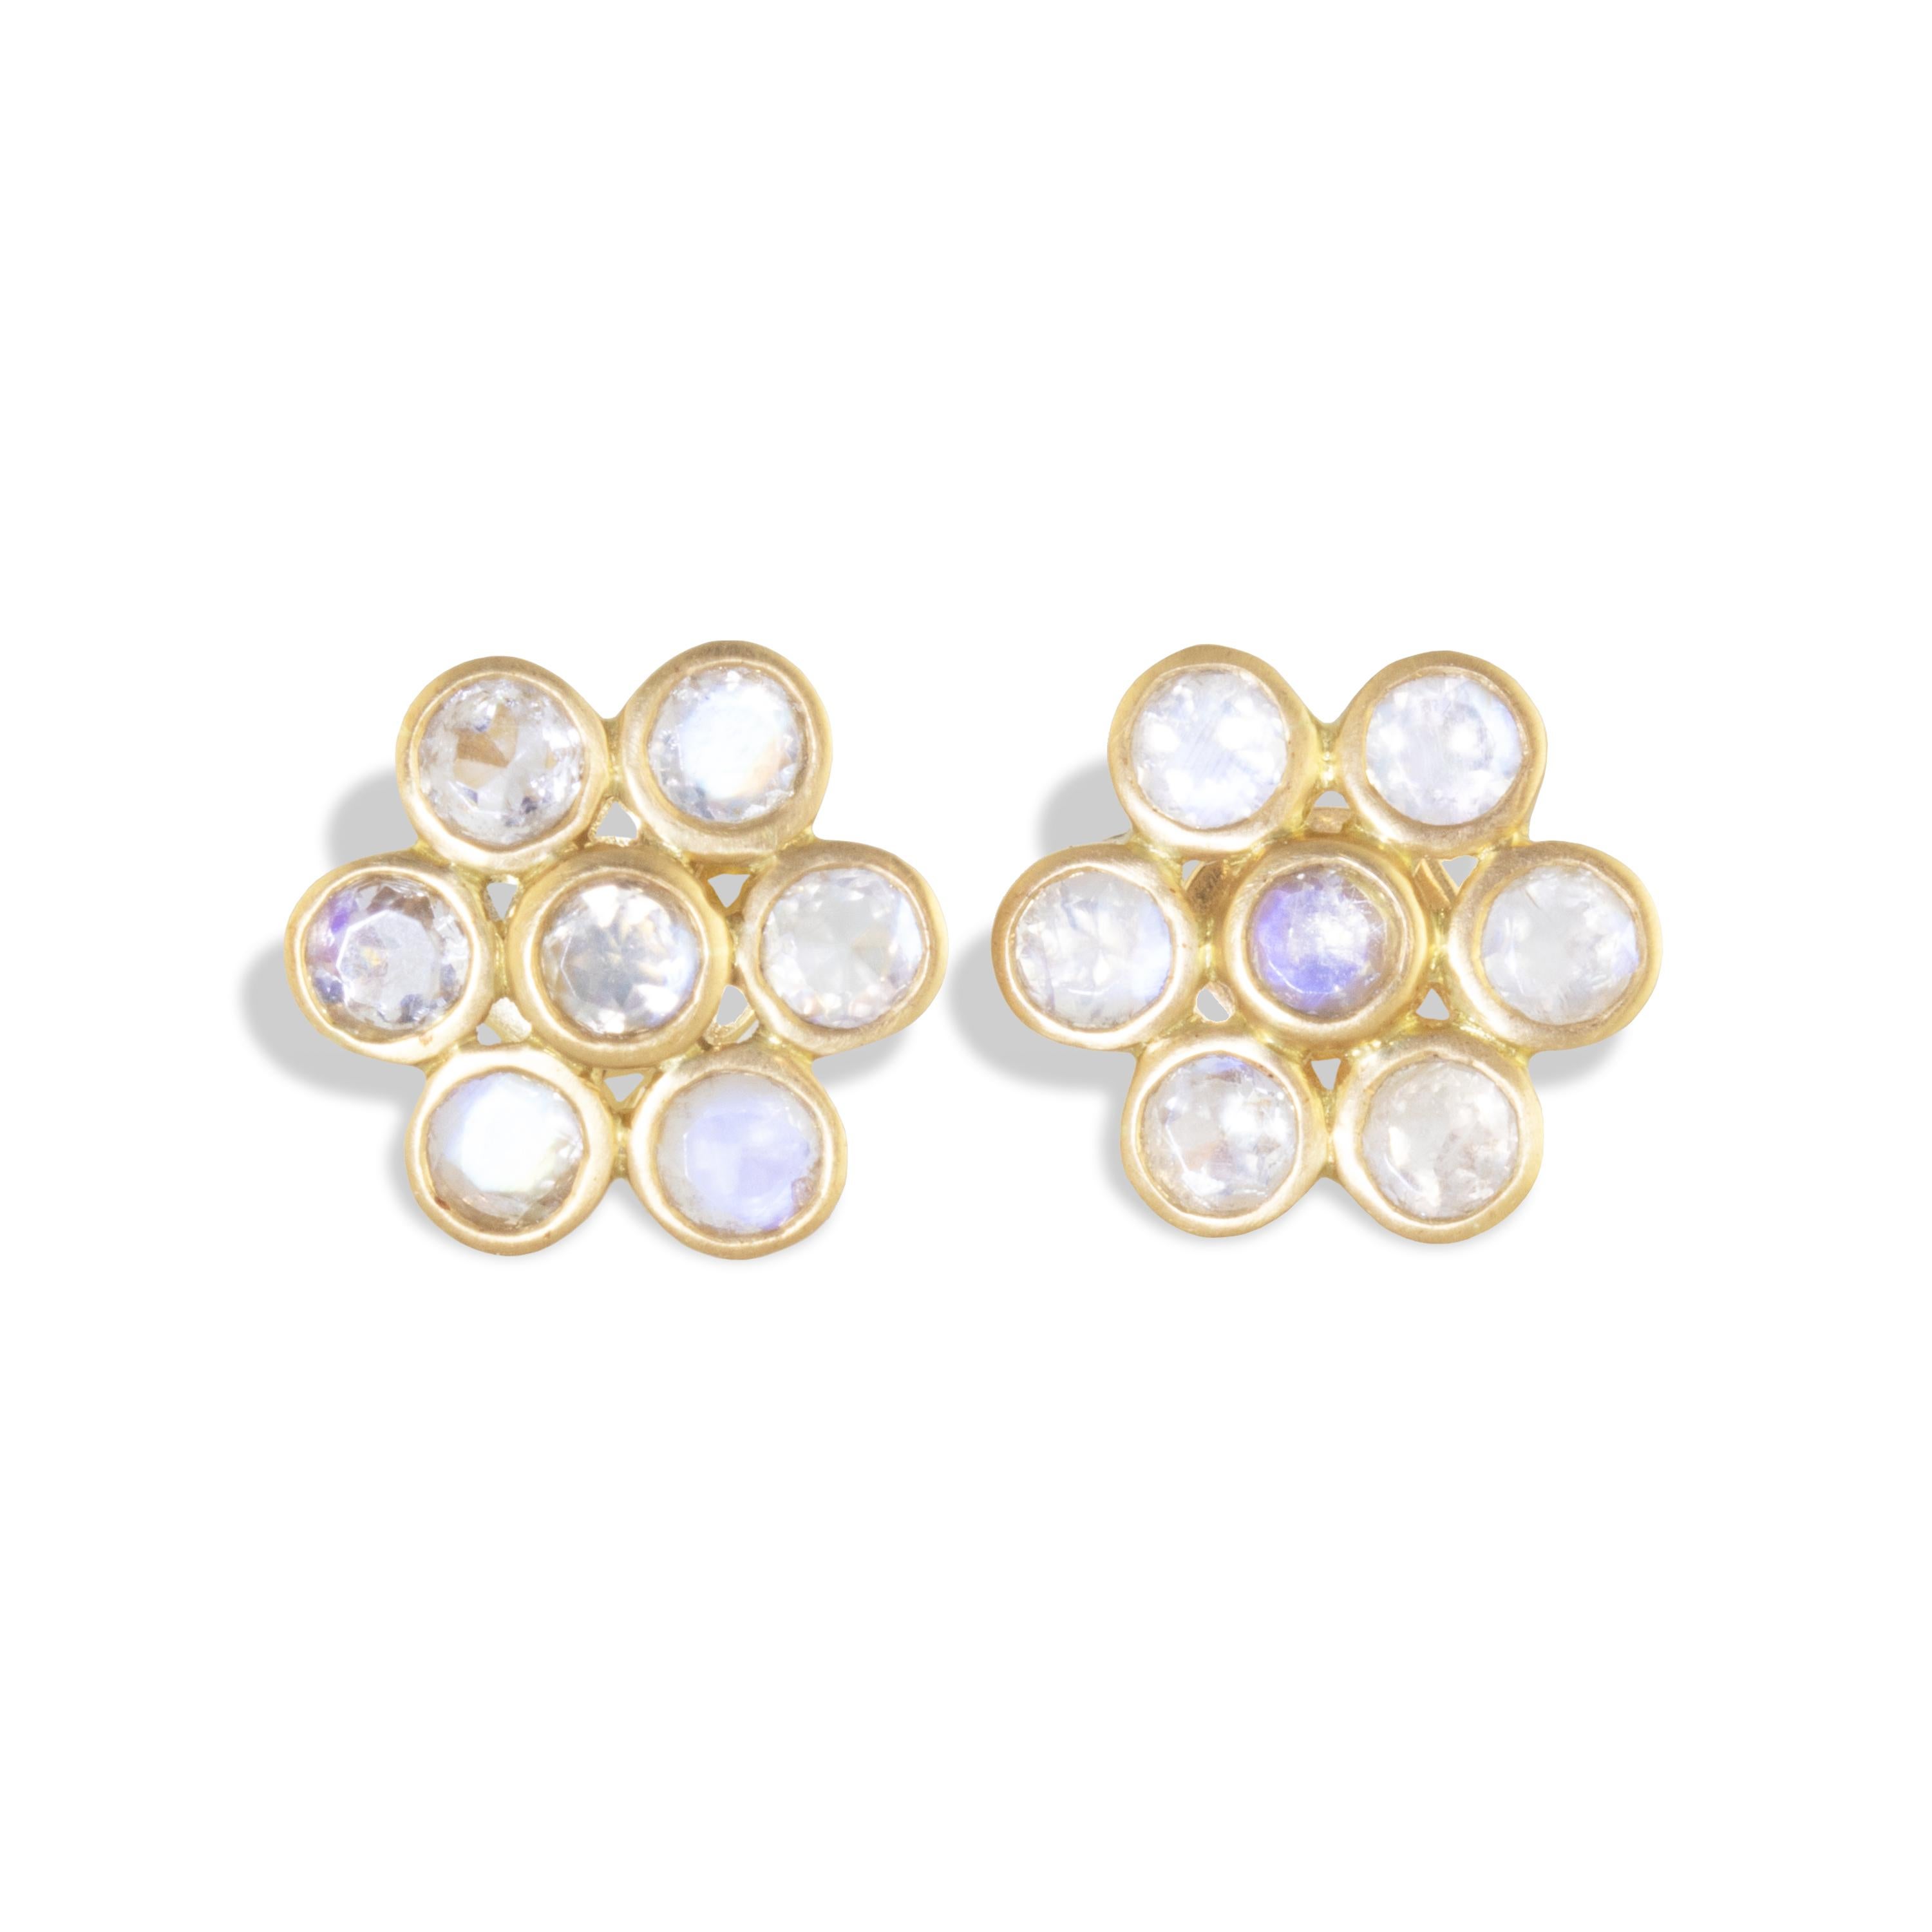 Mesmerizing with its 'glowing-from-within' shade of blue, these delicate stud earrings feature 2.48 carats of round, faceted Rainbow Moonstones set in 22k matte yellow gold.  

Moonstone is the sacred stone of India. According to other legends, 